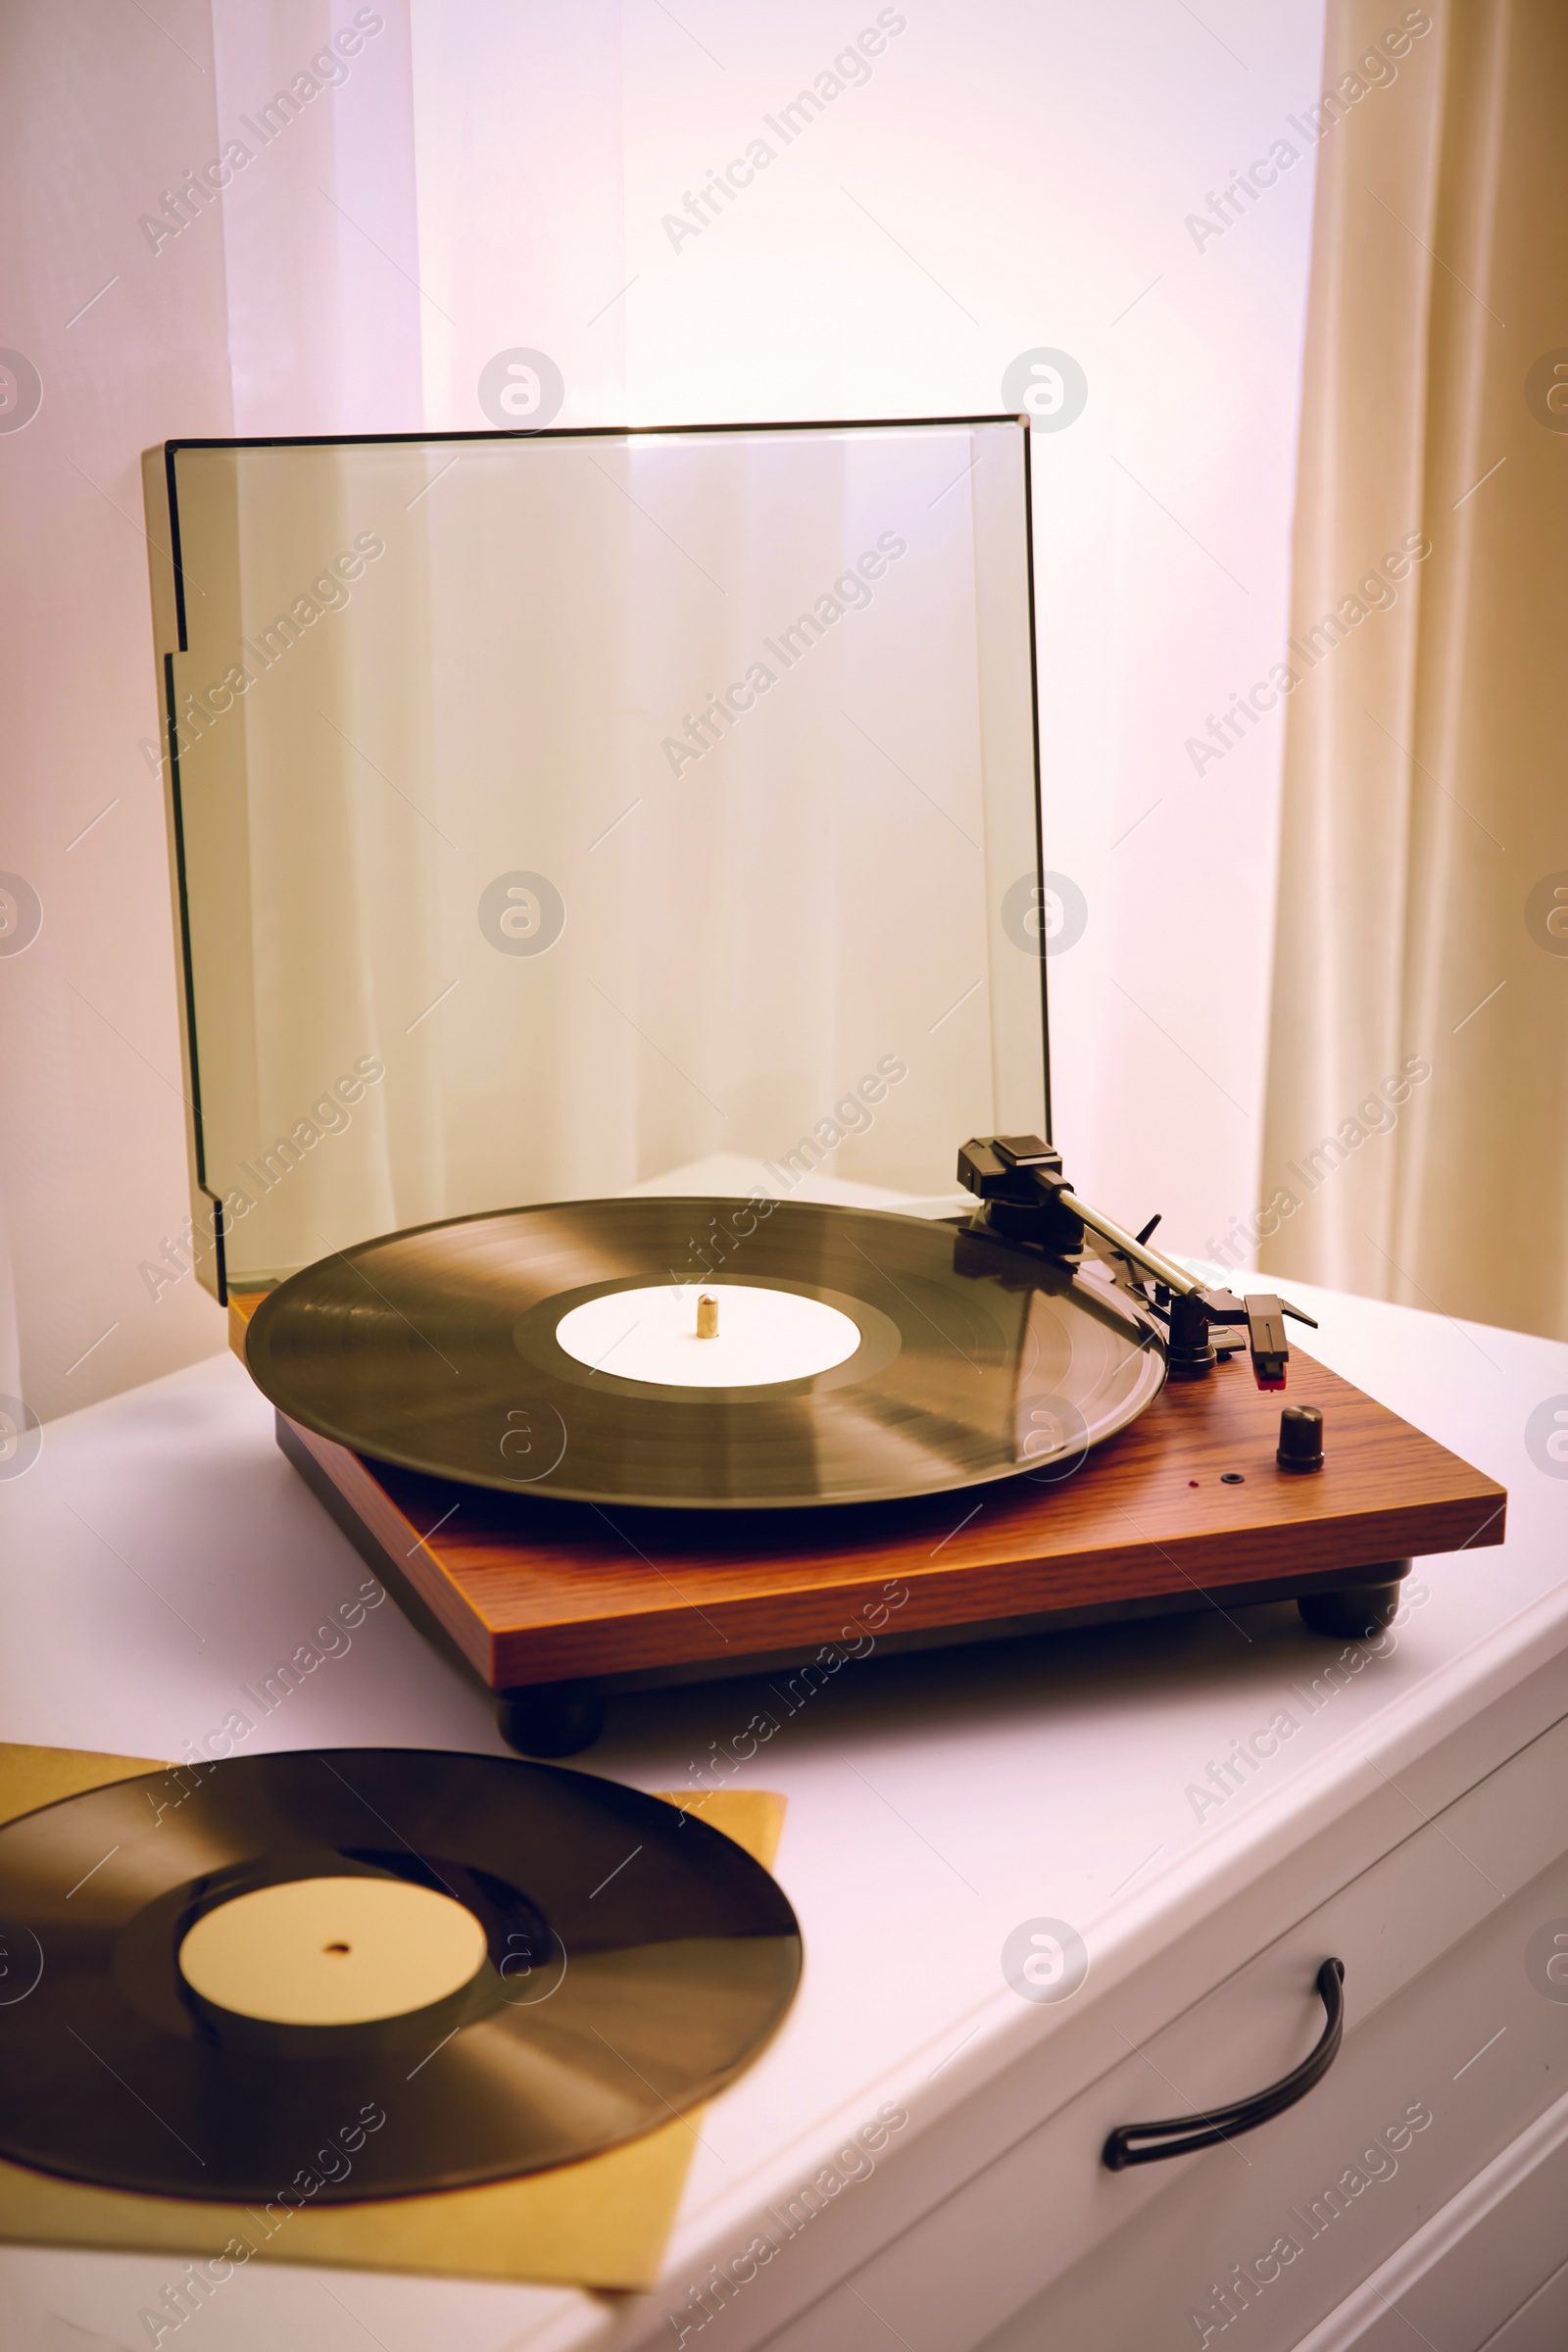 Image of Stylish turntable and vinyl records on white chest of drawers indoors